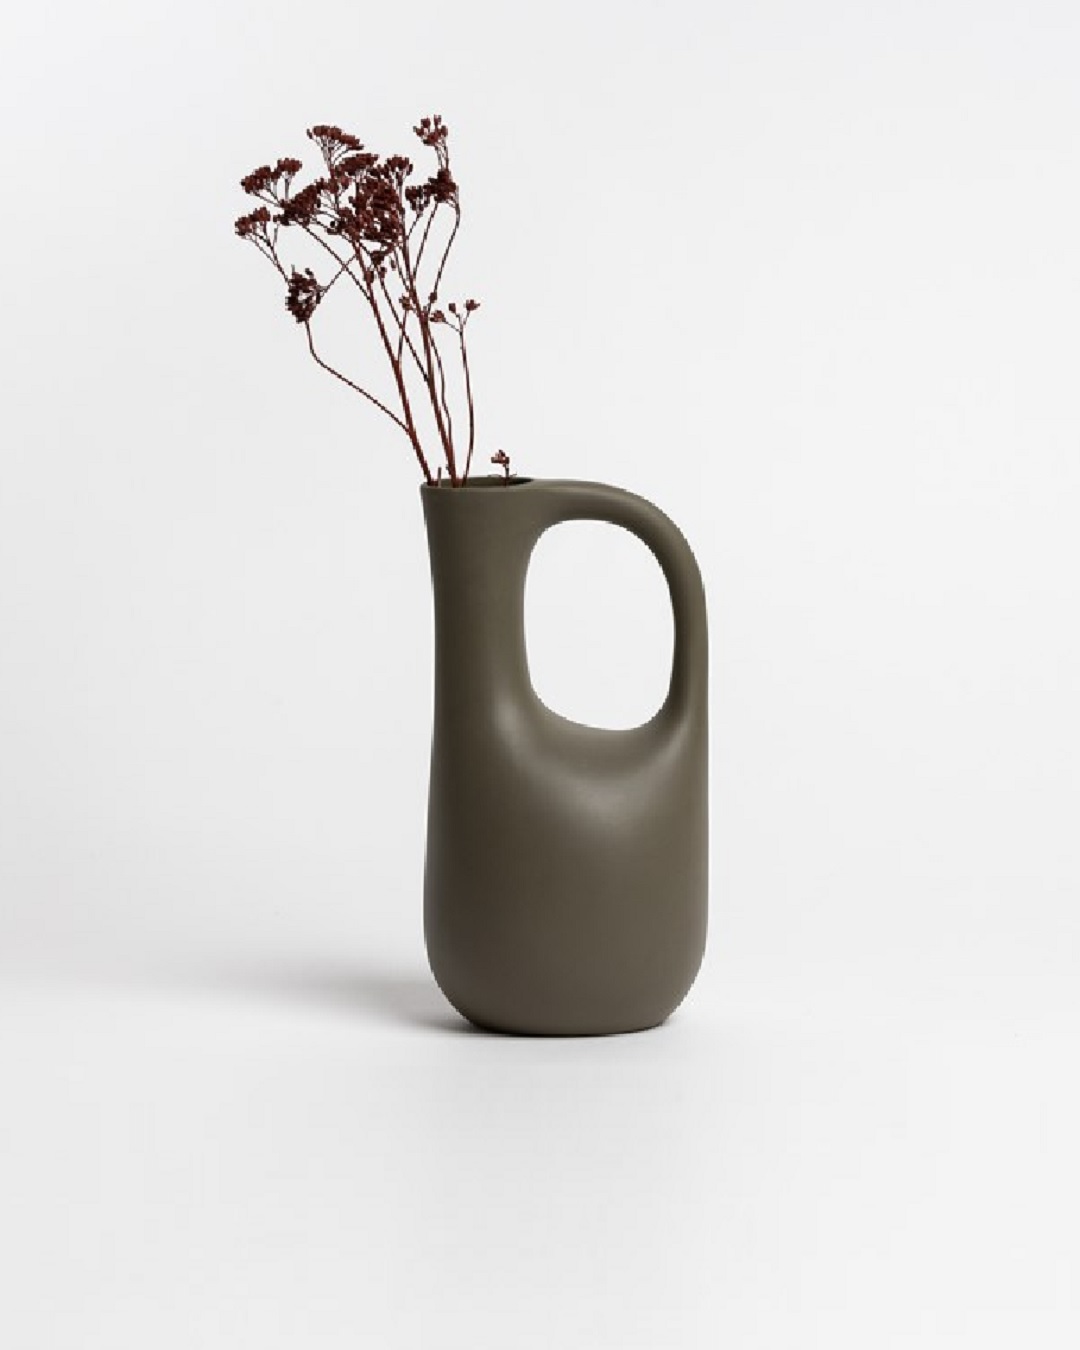 Olive jug with flowers in it